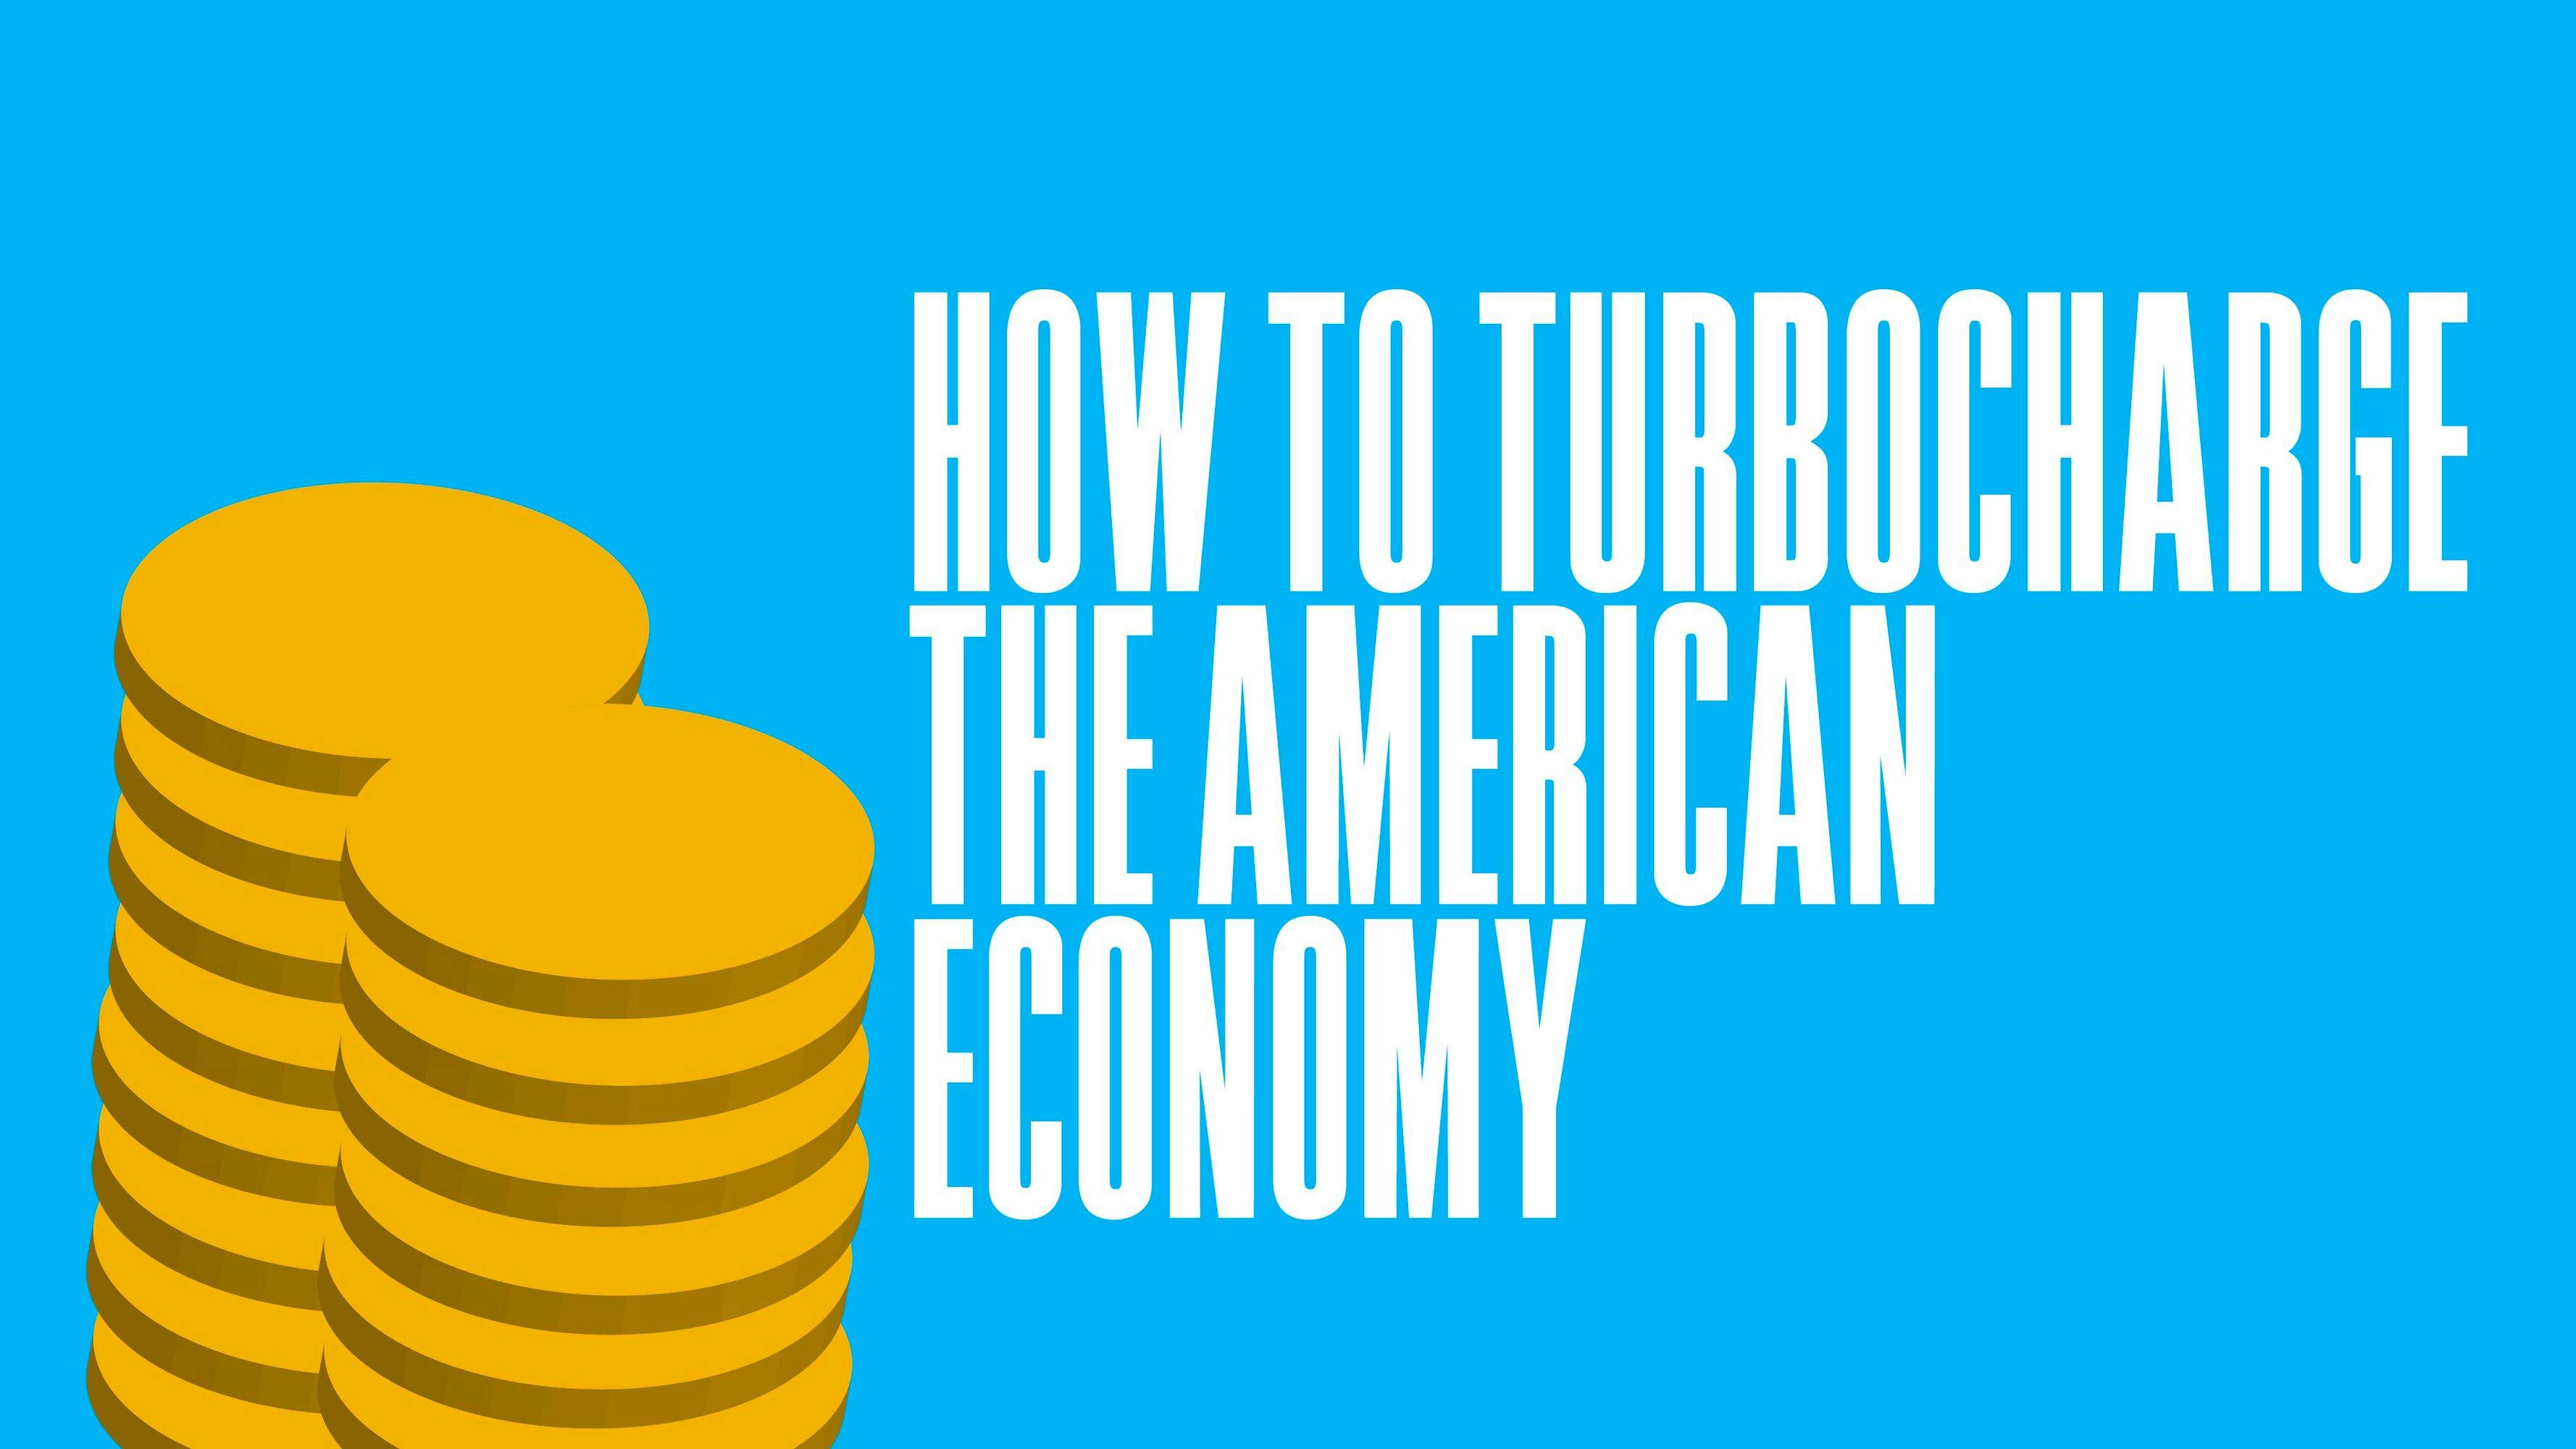 How to Turbocharge the American Economy